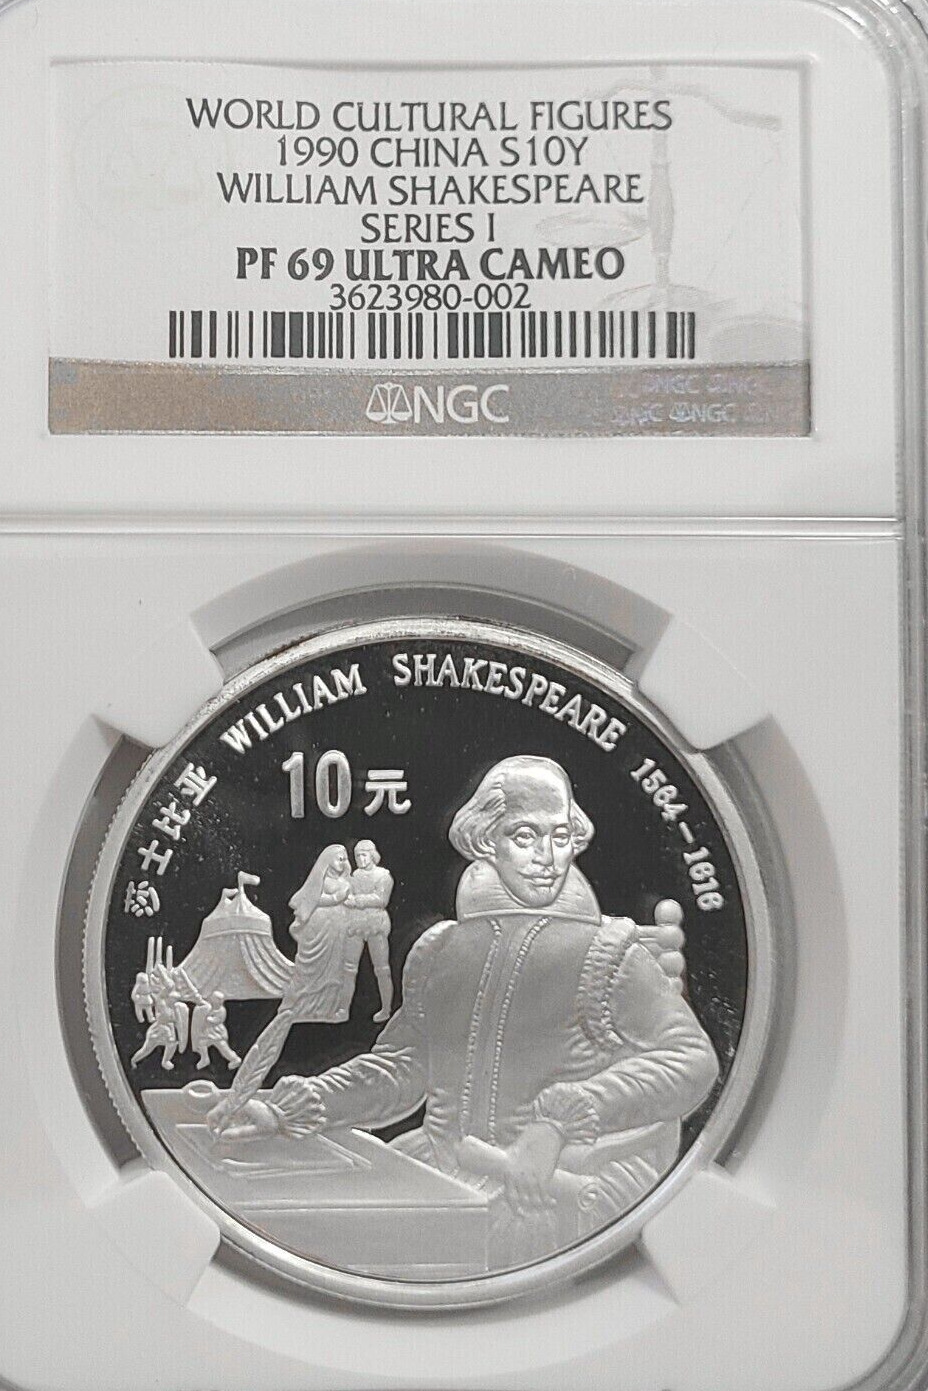 1990 CHINA SILVER PROOF 10 YUAN SHAKESPEARE CULTURAL FIGURES NGC PF69 UCAM